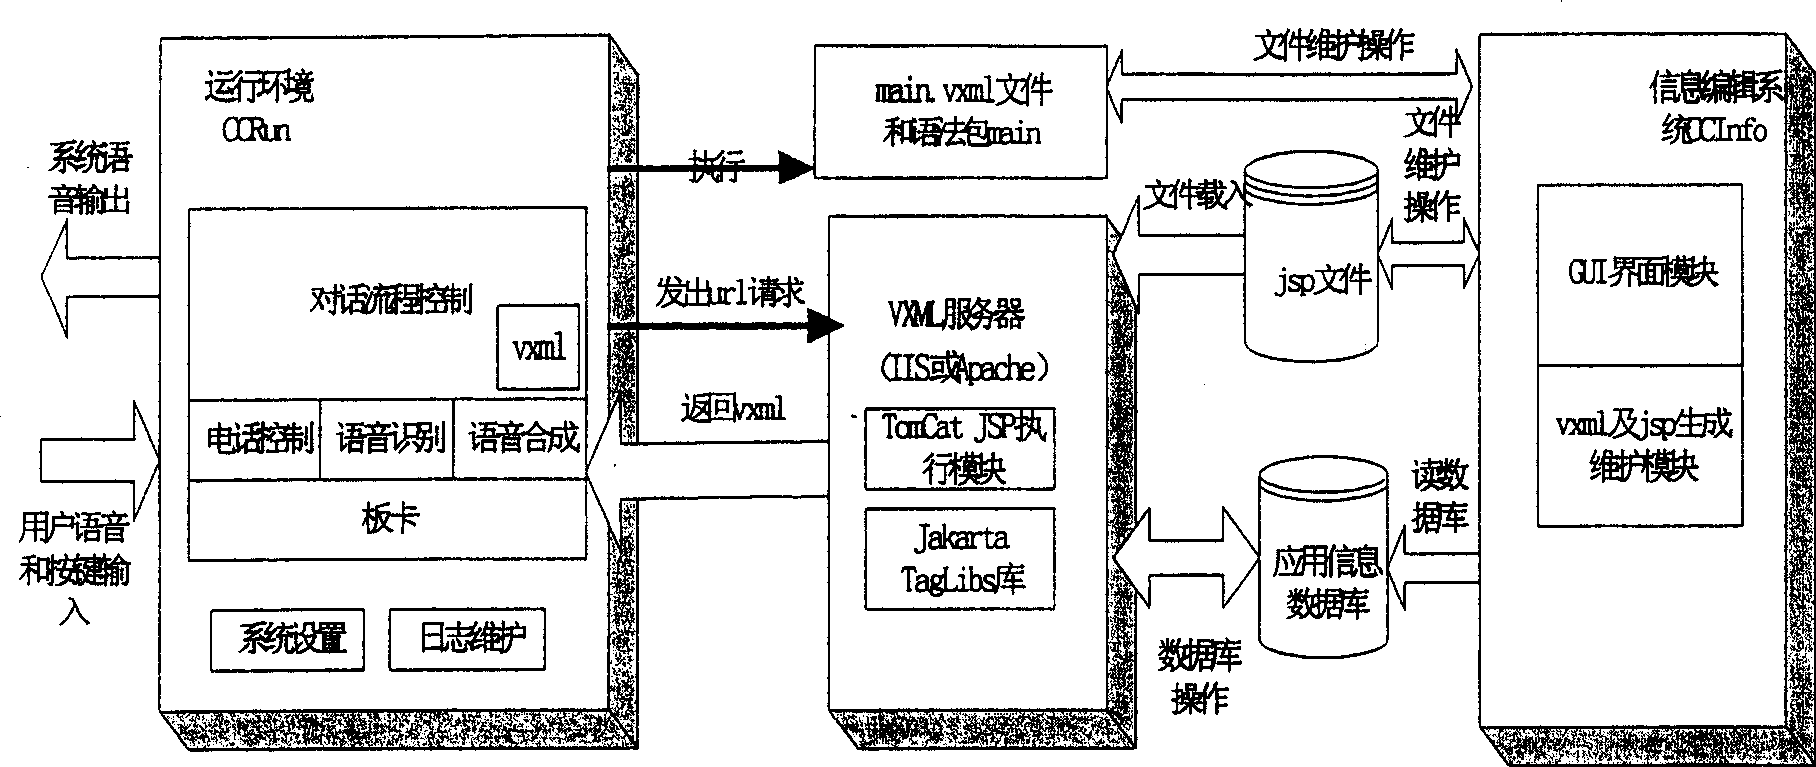 A system and method for realtime interaction of telephone speech based on voicexml